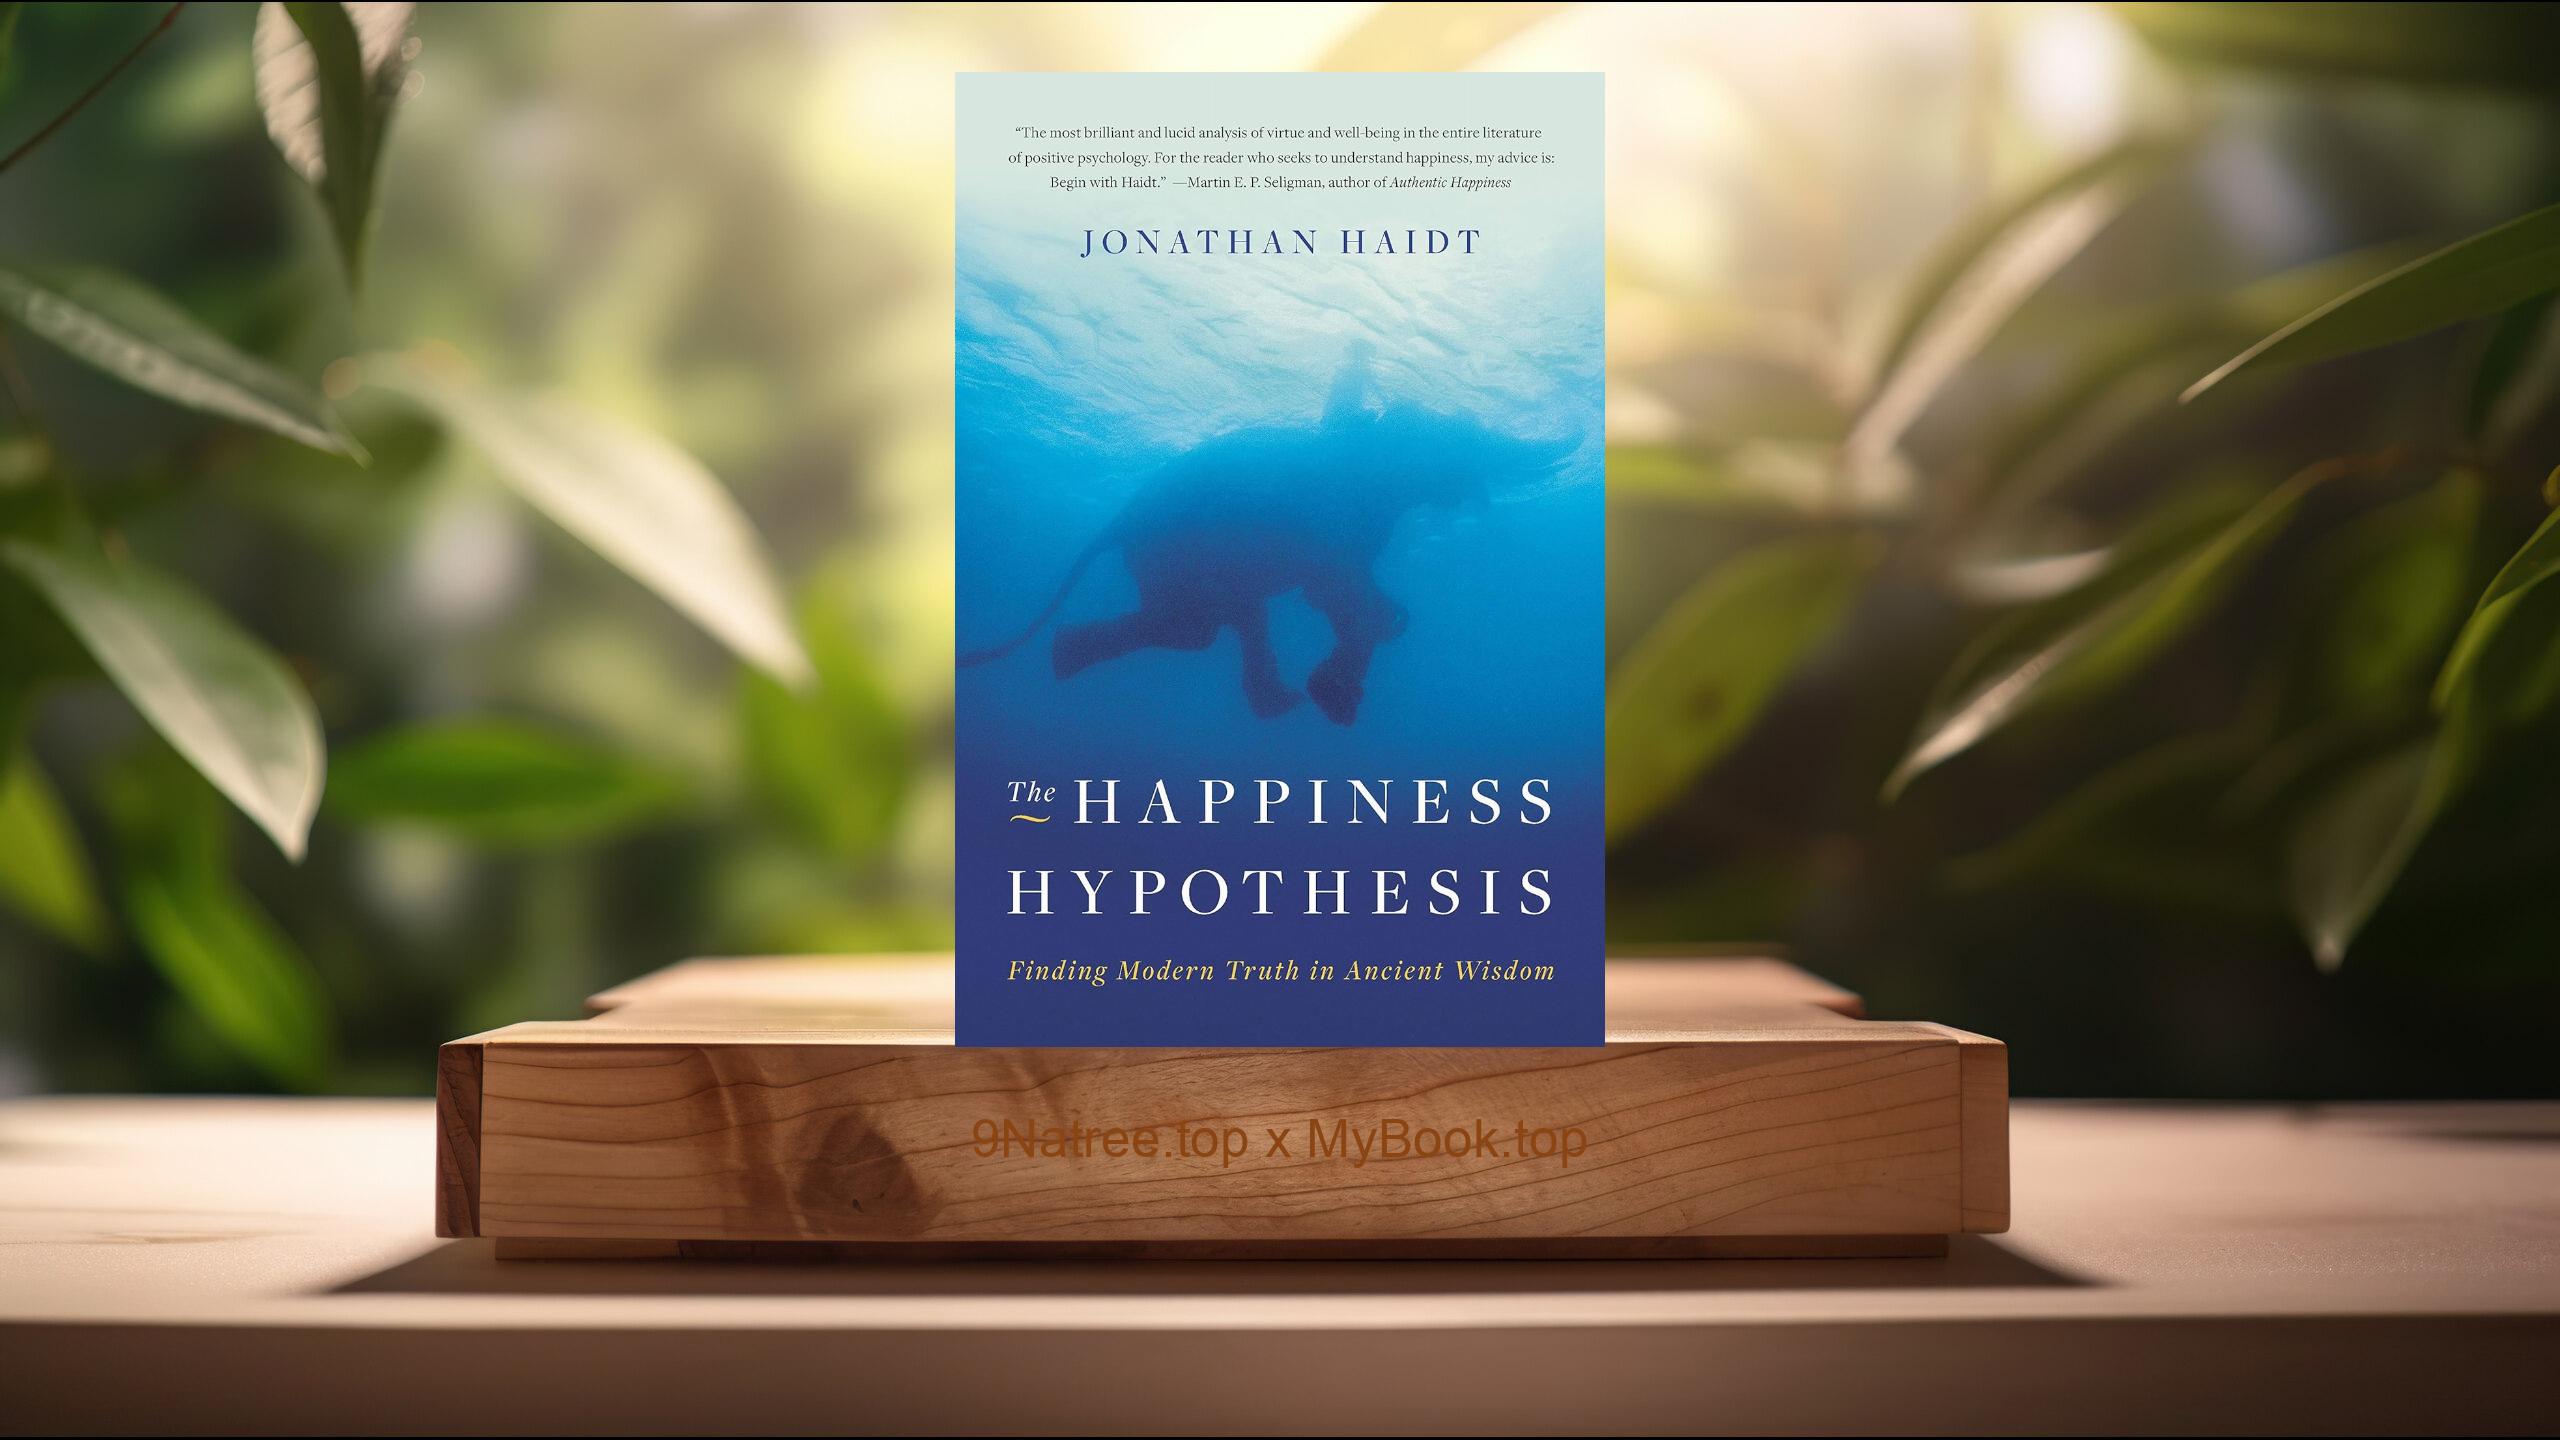 [Review] The Happiness Hypothesis: Finding Modern Truth in Ancient Wisdom (Jonathan Haidt) Summarized